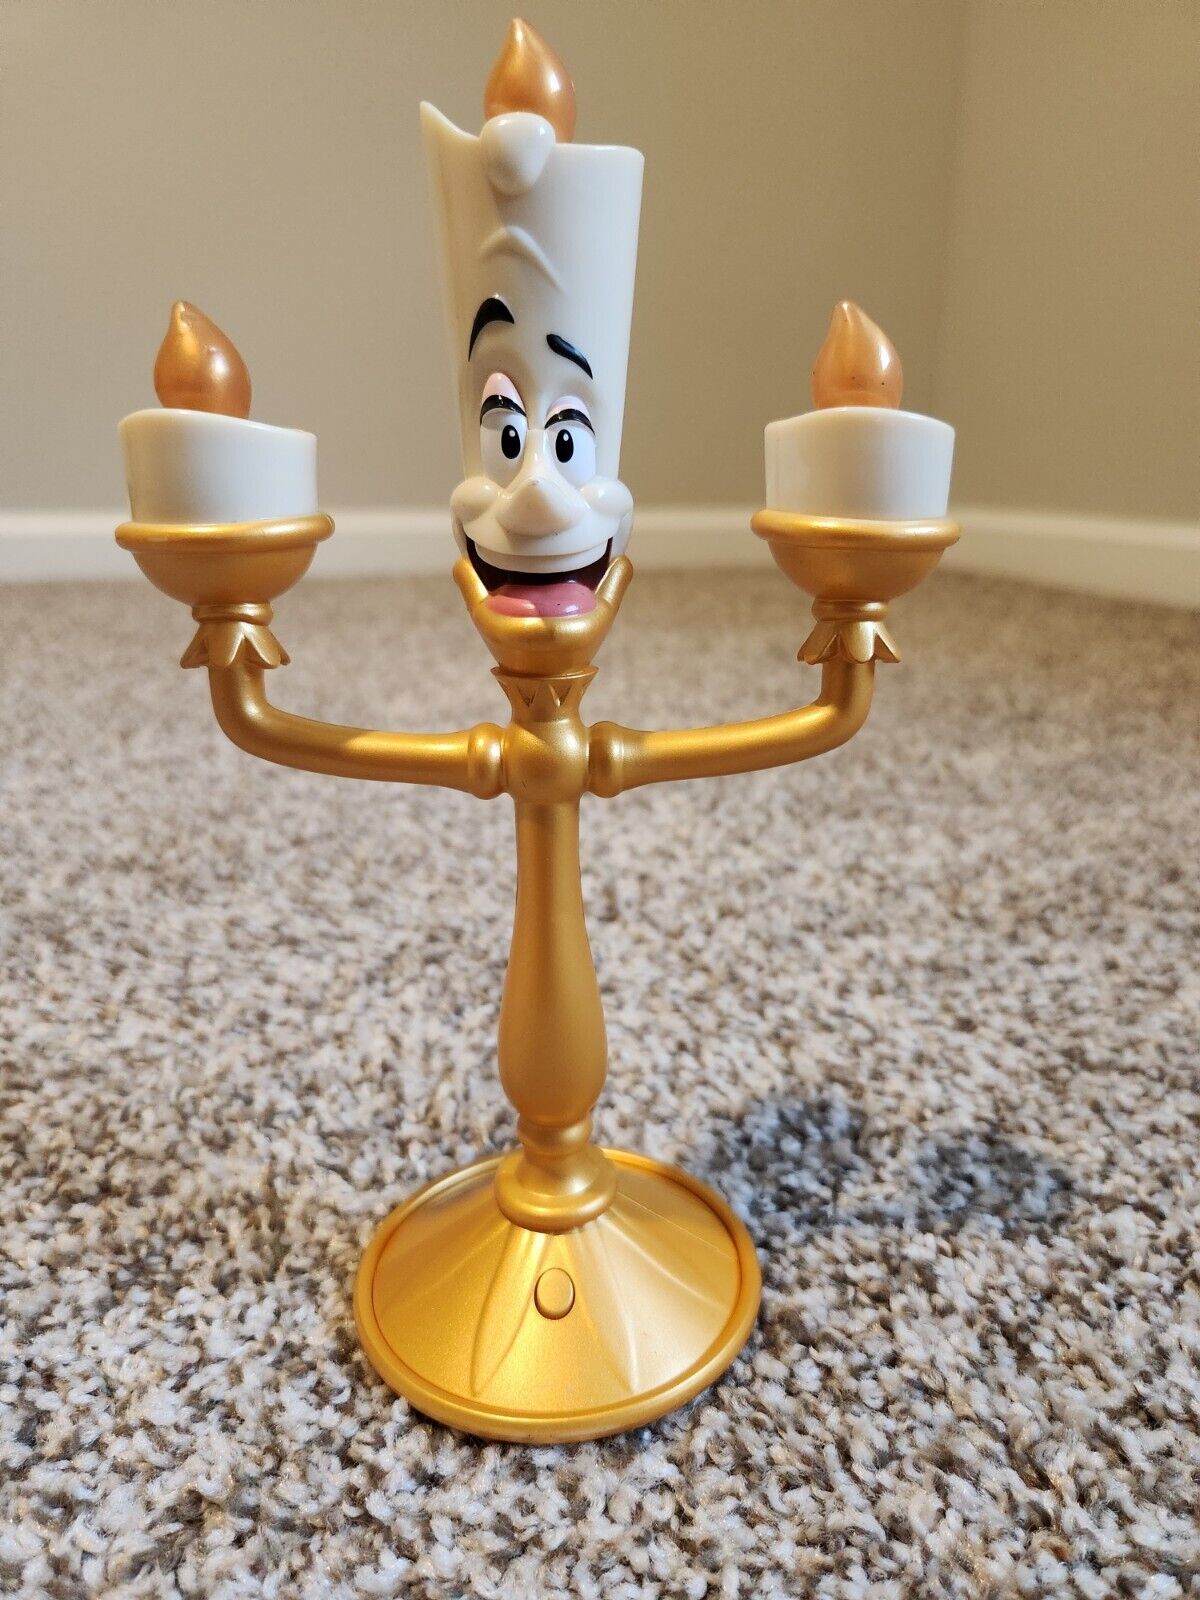 Disney Lumiere Beauty And The Beast Figure Singing Works